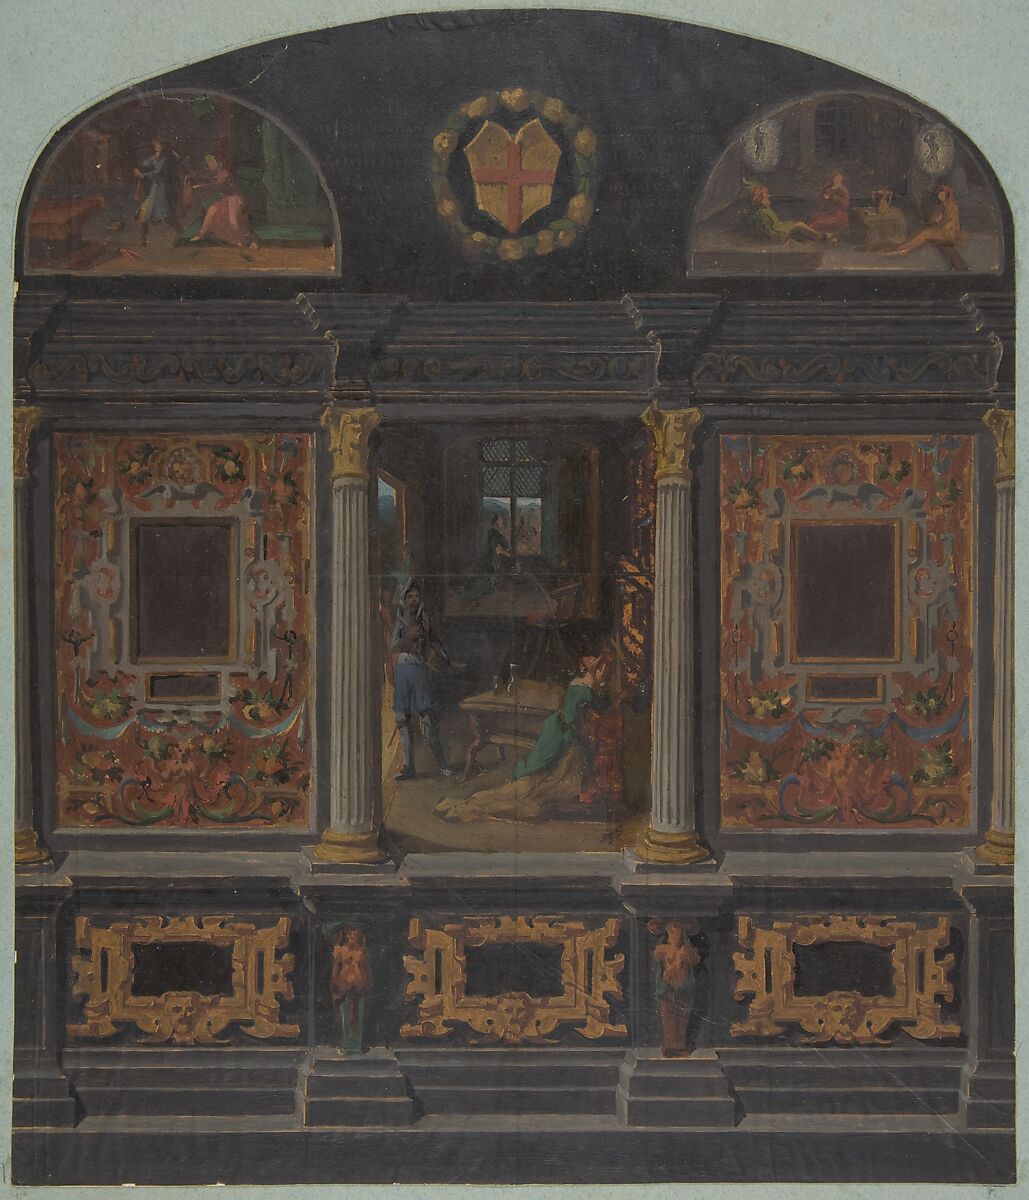 Design for painted wall decoration in the Château de Lude, Sarthe, Jules-Edmond-Charles Lachaise (French, died 1897), gouache on laid paper, inset in blue wove paper 